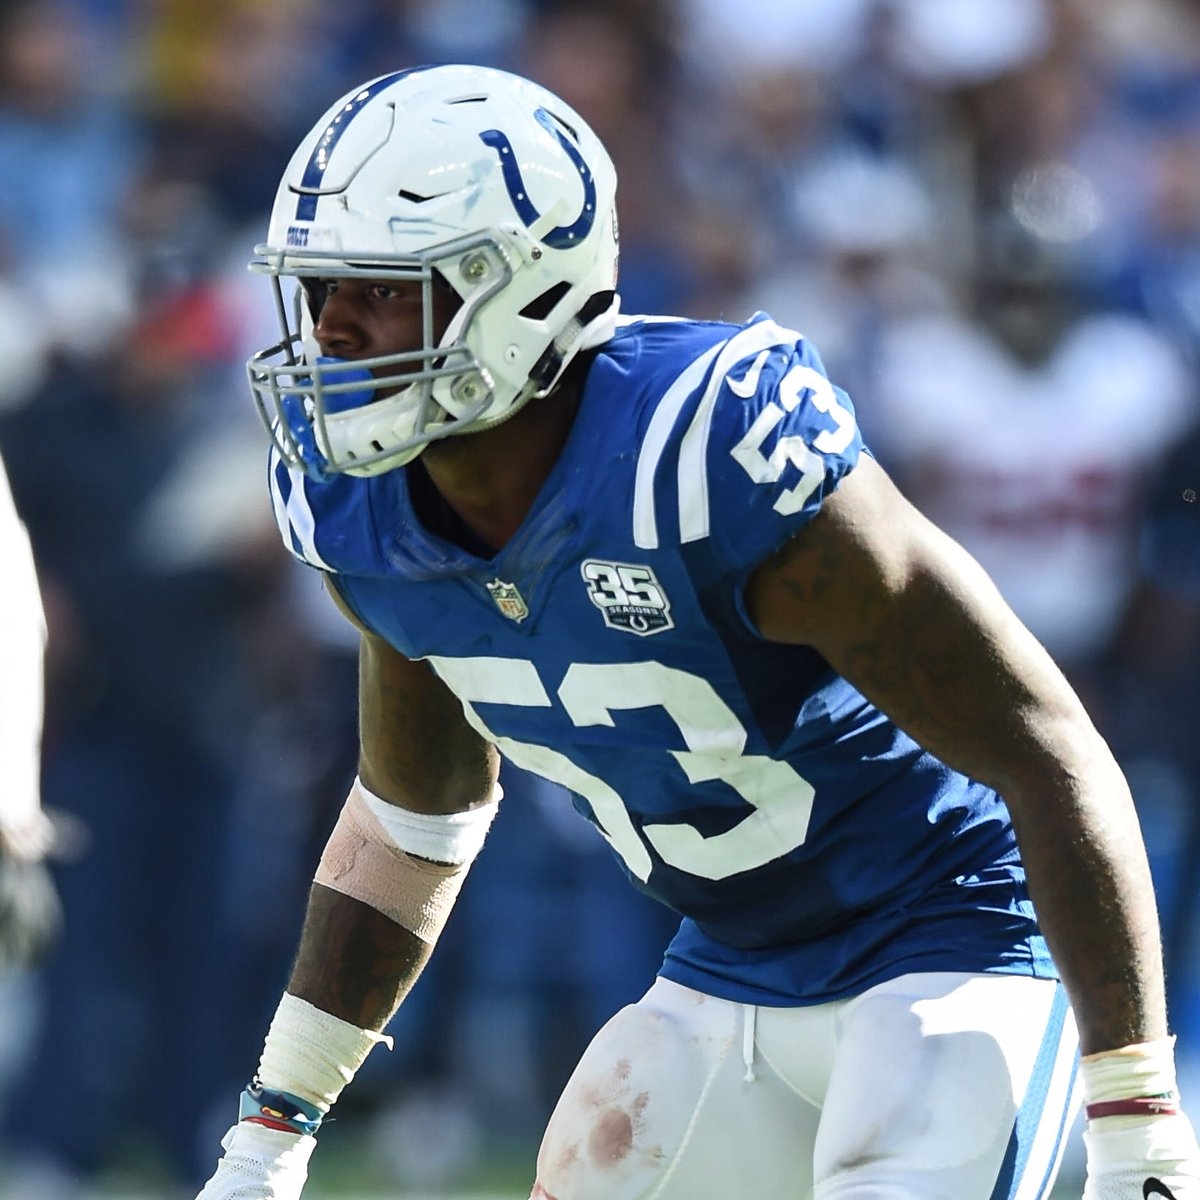 Doyel: Colts need the BDPA — Best Defensive Player Available